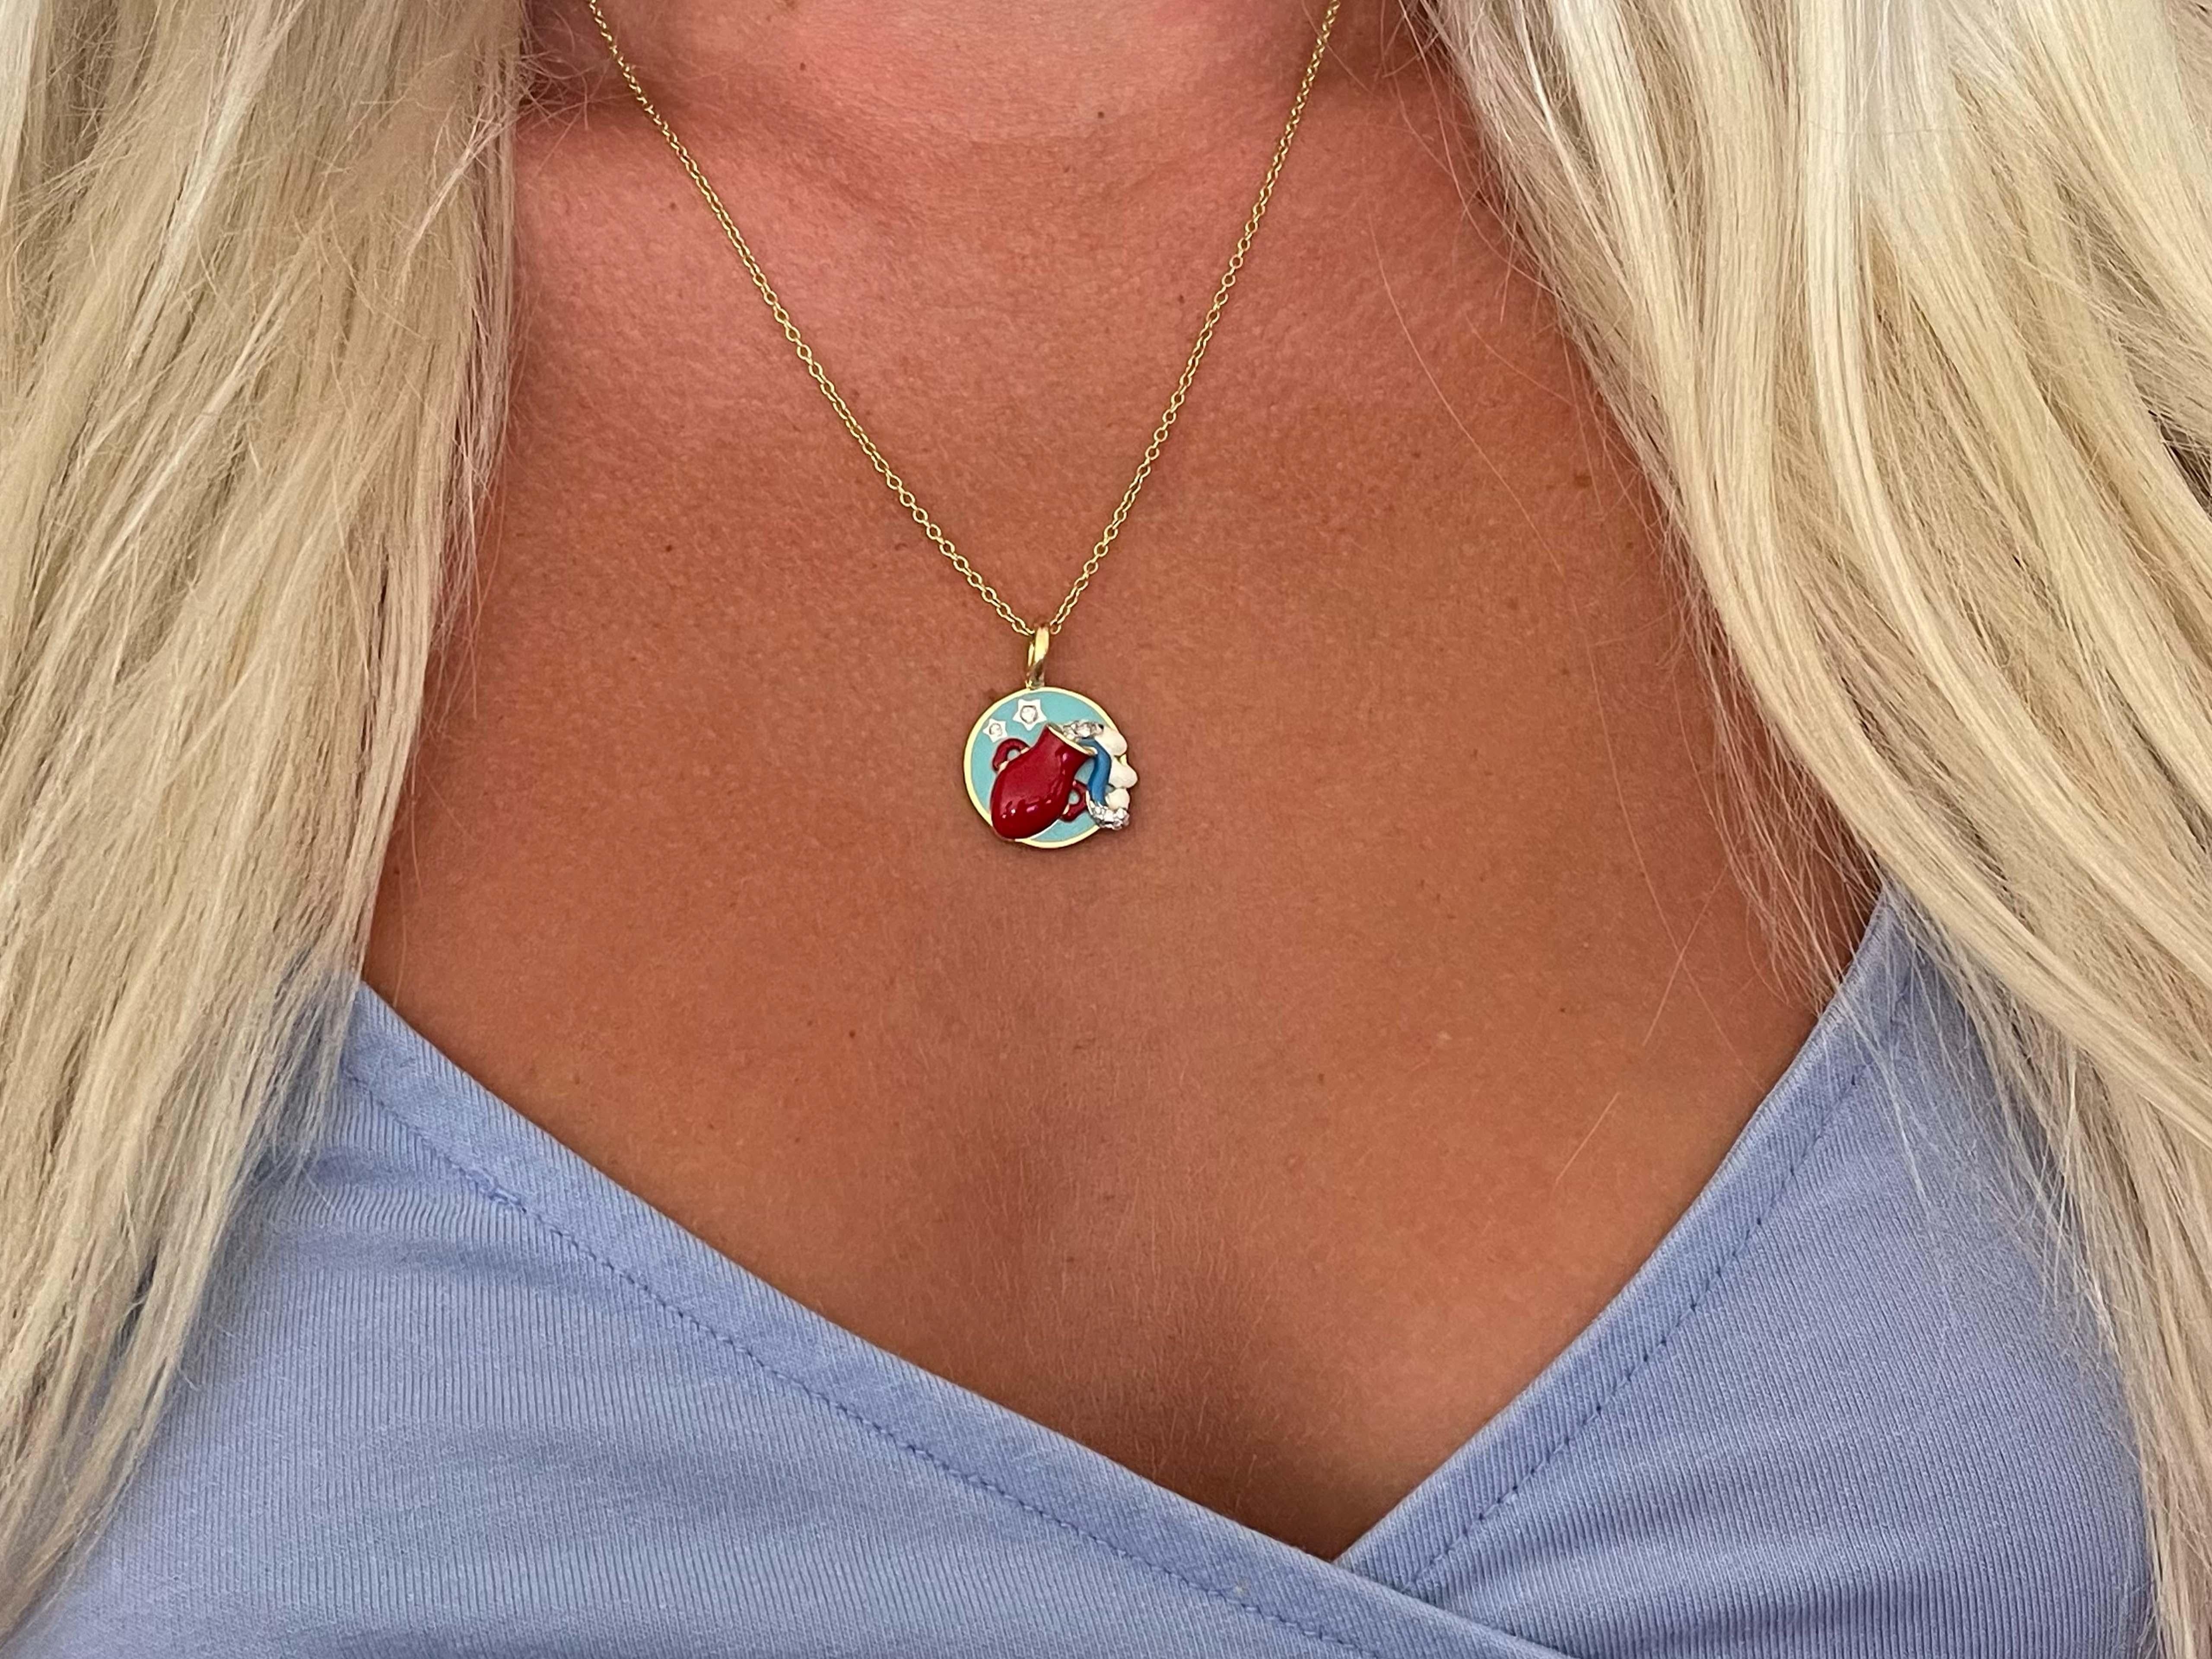 This beautiful aquarius diamond Horoscope pendant features a water carrier, symbolic with the aquarius zodiac sign. The enamel is red, seafoam blue and dark blue. This pendant and chain is crafted in 18k yellow gold. The diamonds on the pendant are